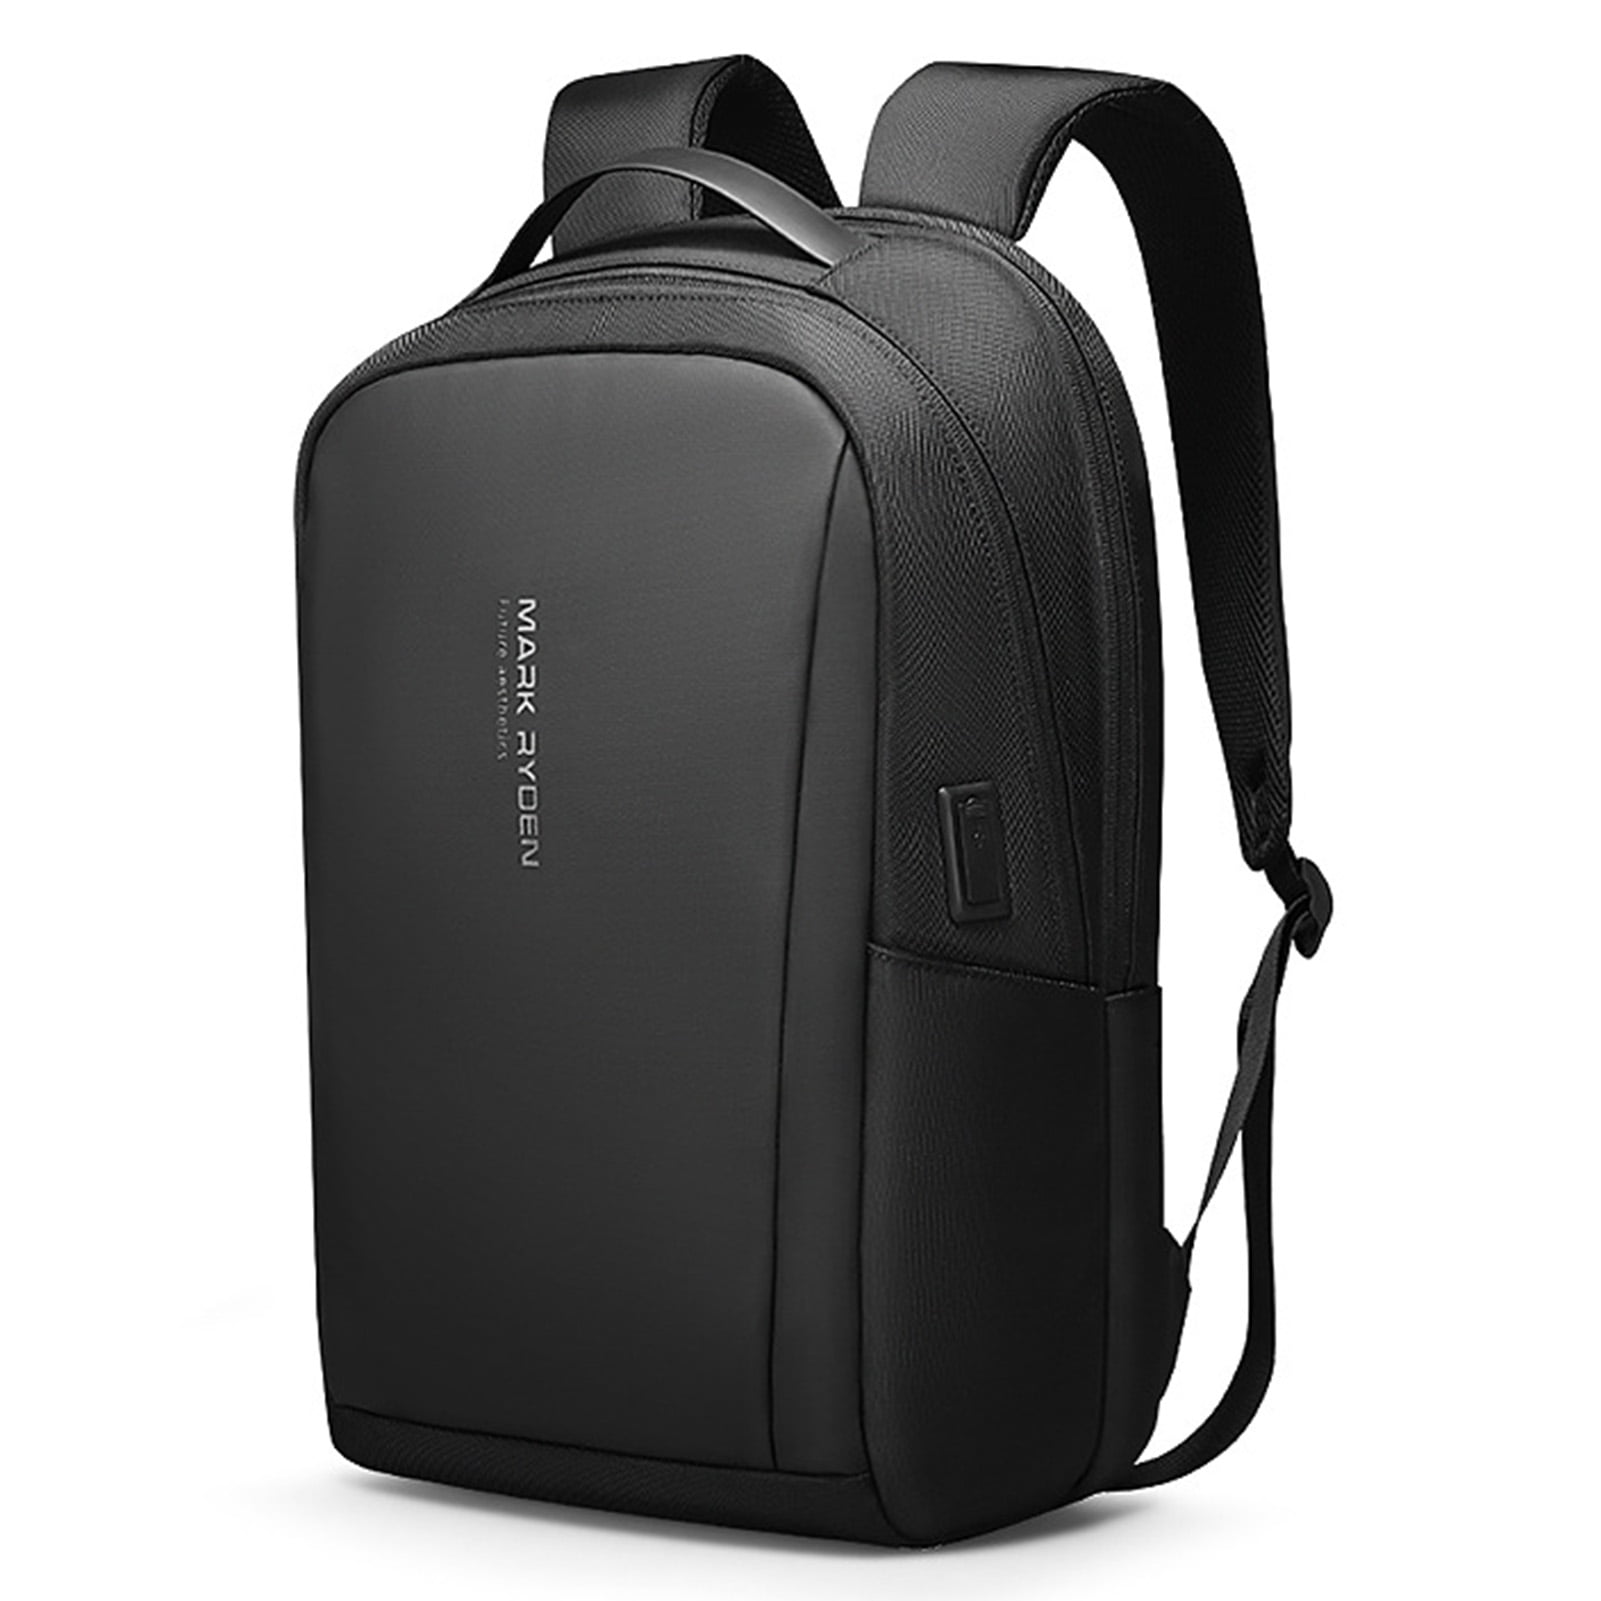 Travel Laptop Backpack Water Resistant Anti-Theft Bag with USB 